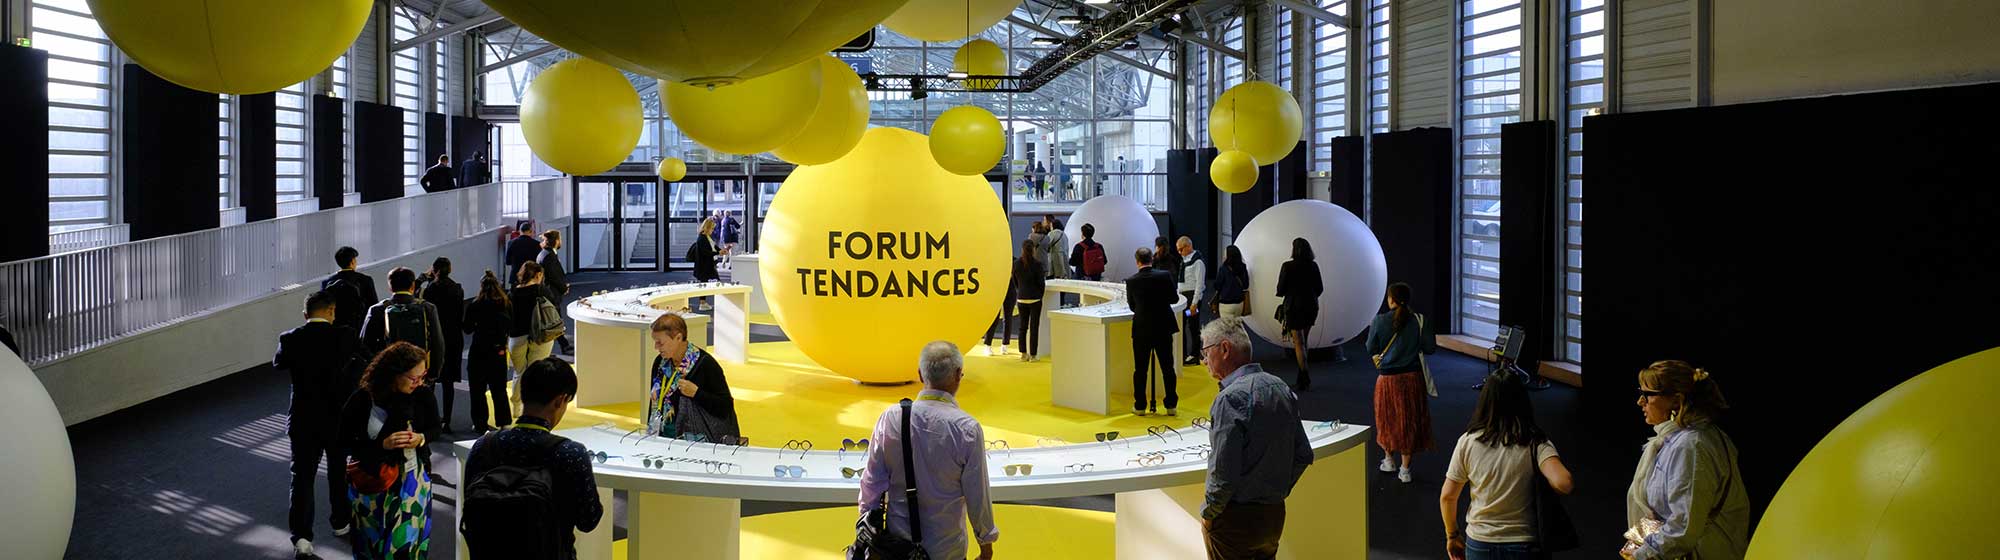 Yellow balloons on display at the Trends Forum